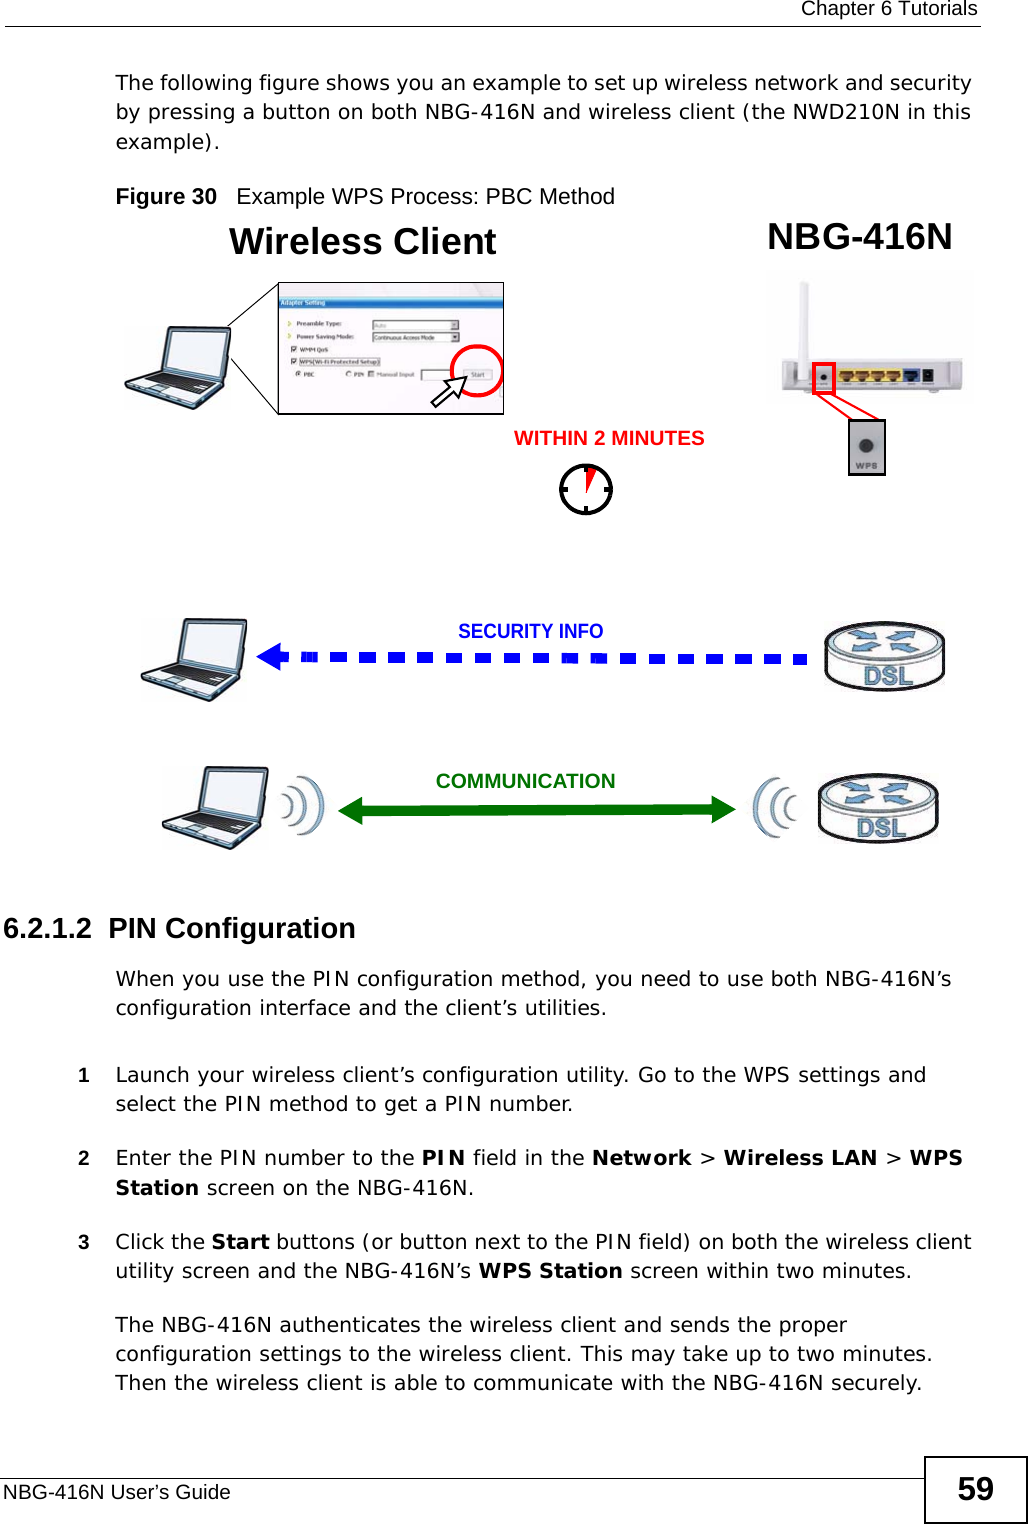  Chapter 6 TutorialsNBG-416N User’s Guide 59The following figure shows you an example to set up wireless network and security by pressing a button on both NBG-416N and wireless client (the NWD210N in this example).Figure 30   Example WPS Process: PBC Method6.2.1.2  PIN ConfigurationWhen you use the PIN configuration method, you need to use both NBG-416N’s configuration interface and the client’s utilities.1Launch your wireless client’s configuration utility. Go to the WPS settings and select the PIN method to get a PIN number.2Enter the PIN number to the PIN field in the Network &gt; Wireless LAN &gt; WPS Station screen on the NBG-416N.3Click the Start buttons (or button next to the PIN field) on both the wireless client utility screen and the NBG-416N’s WPS Station screen within two minutes.The NBG-416N authenticates the wireless client and sends the proper configuration settings to the wireless client. This may take up to two minutes. Then the wireless client is able to communicate with the NBG-416N securely. Wireless Client    NBG-416NSECURITY INFOCOMMUNICATIONWITHIN 2 MINUTES